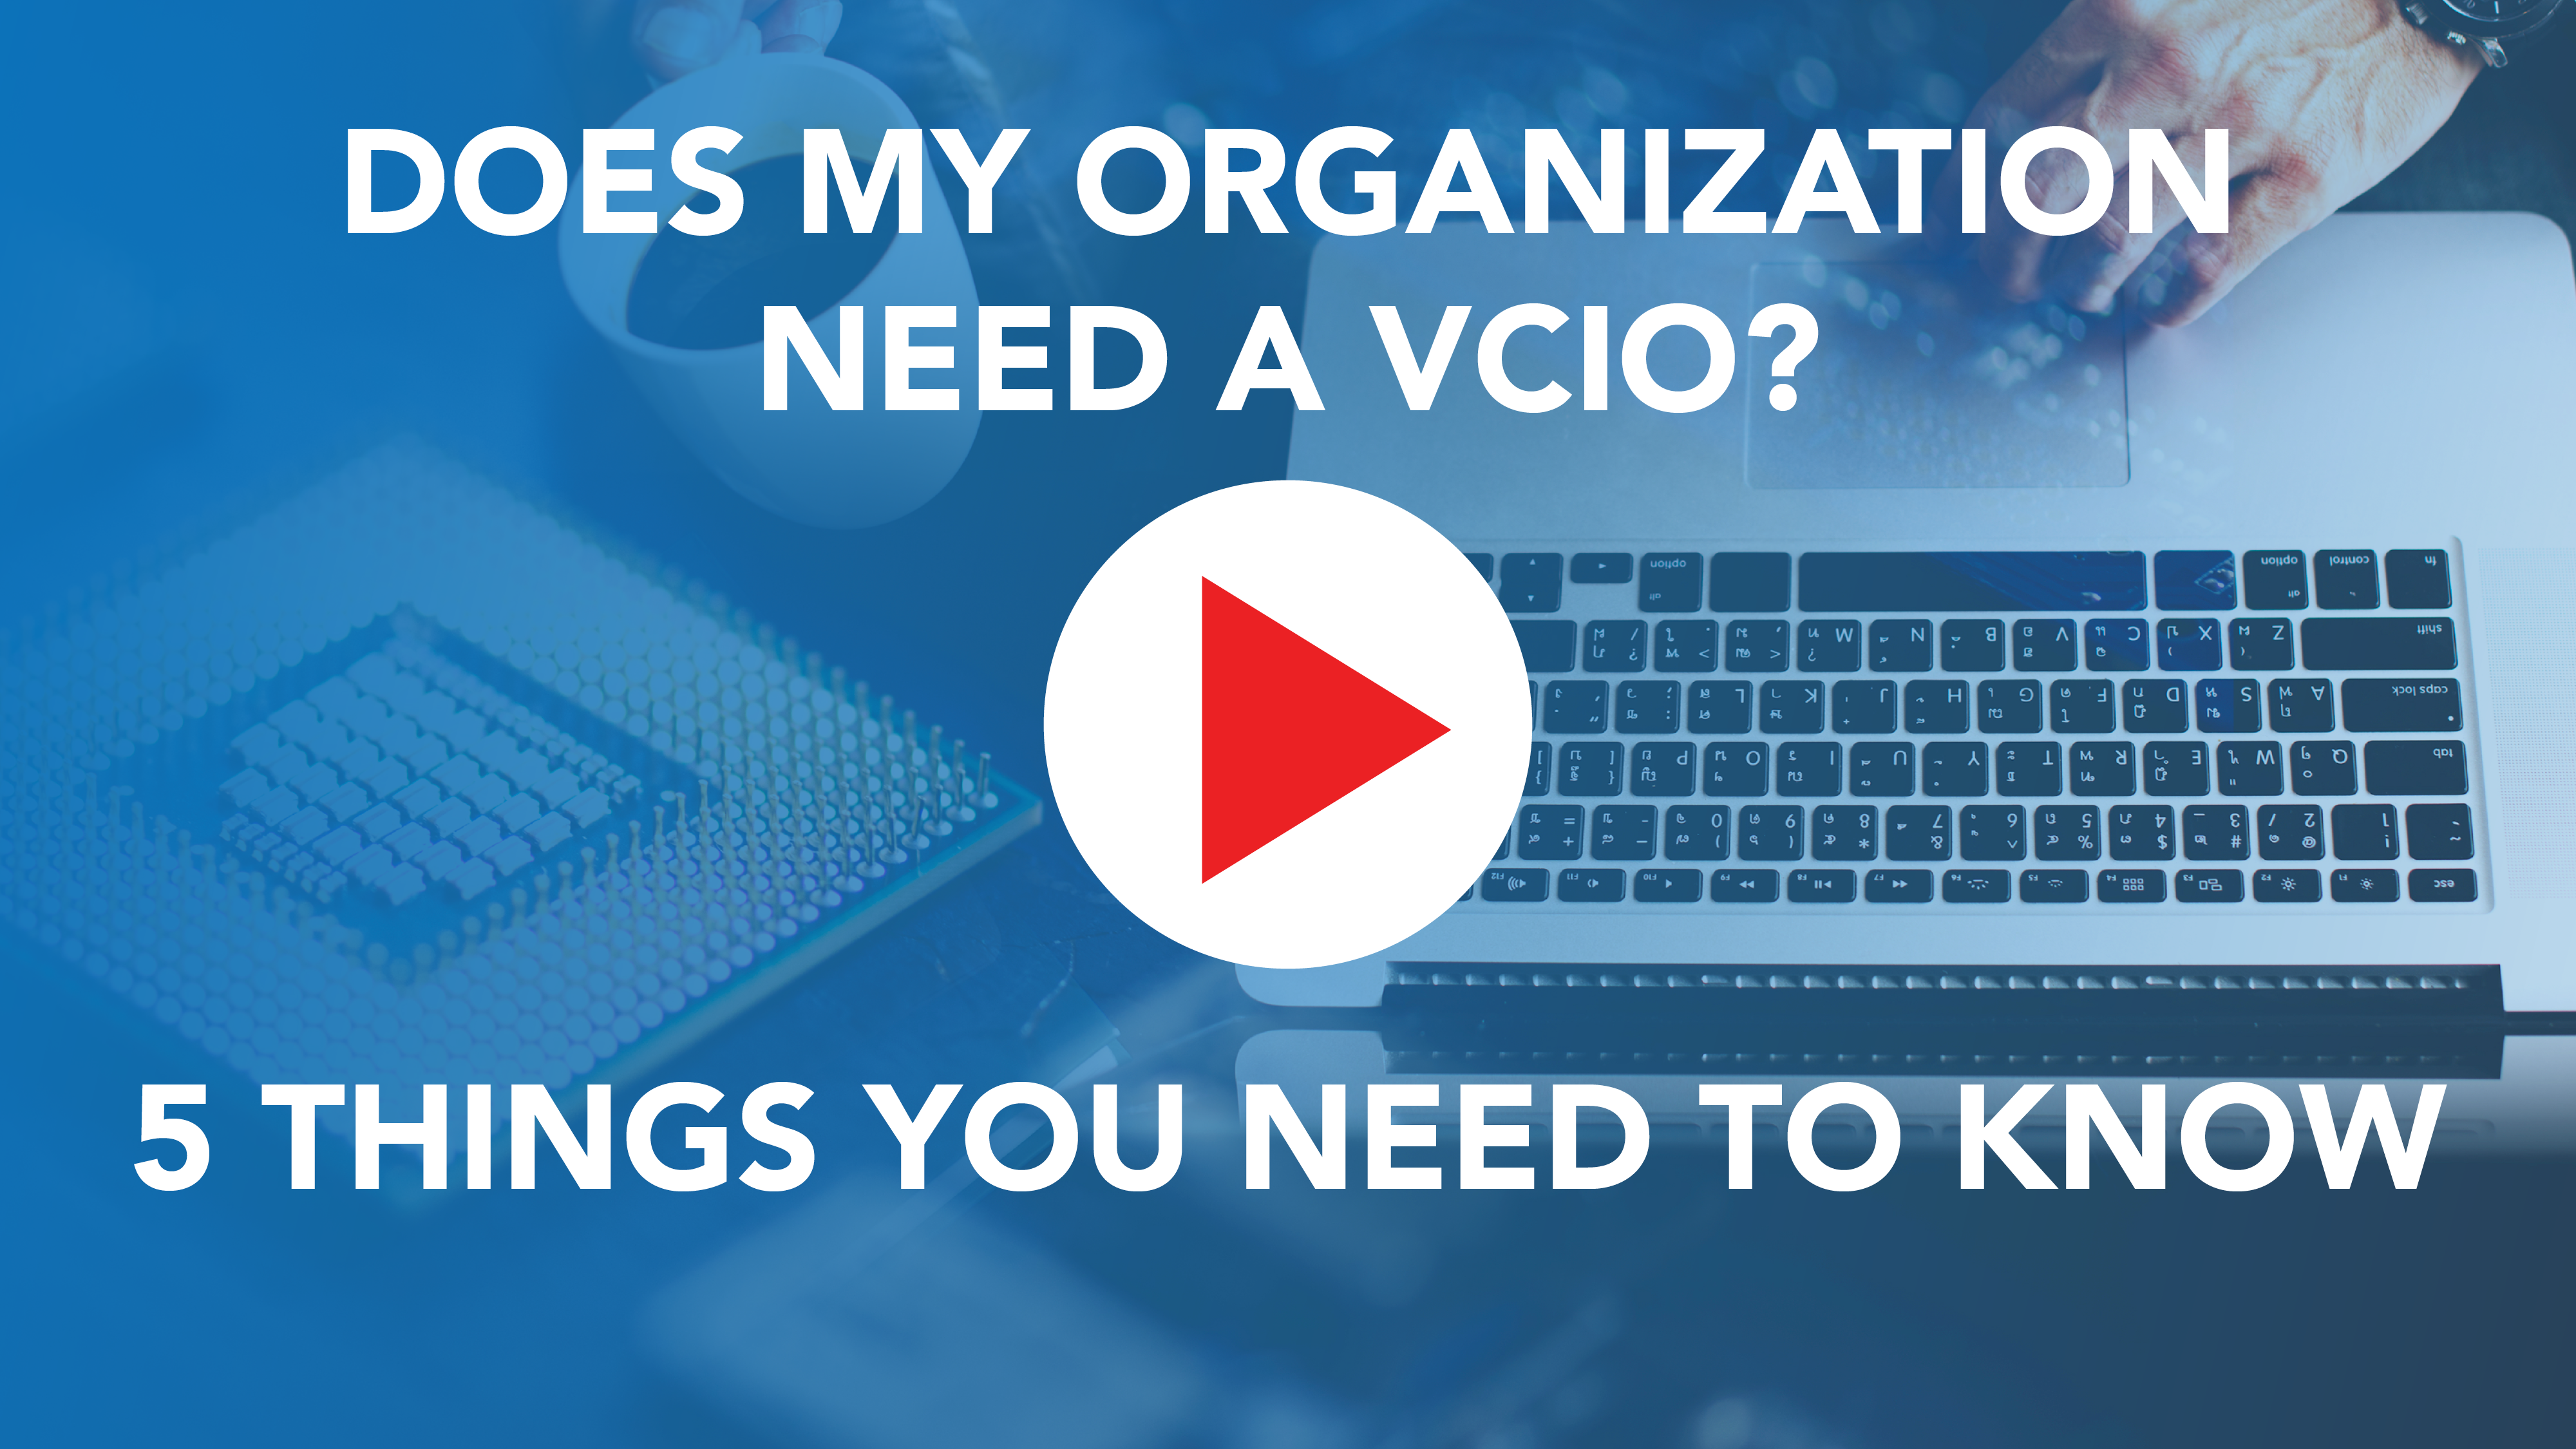 Does My Organization Need a vCIO? 5 Things You Need to Know